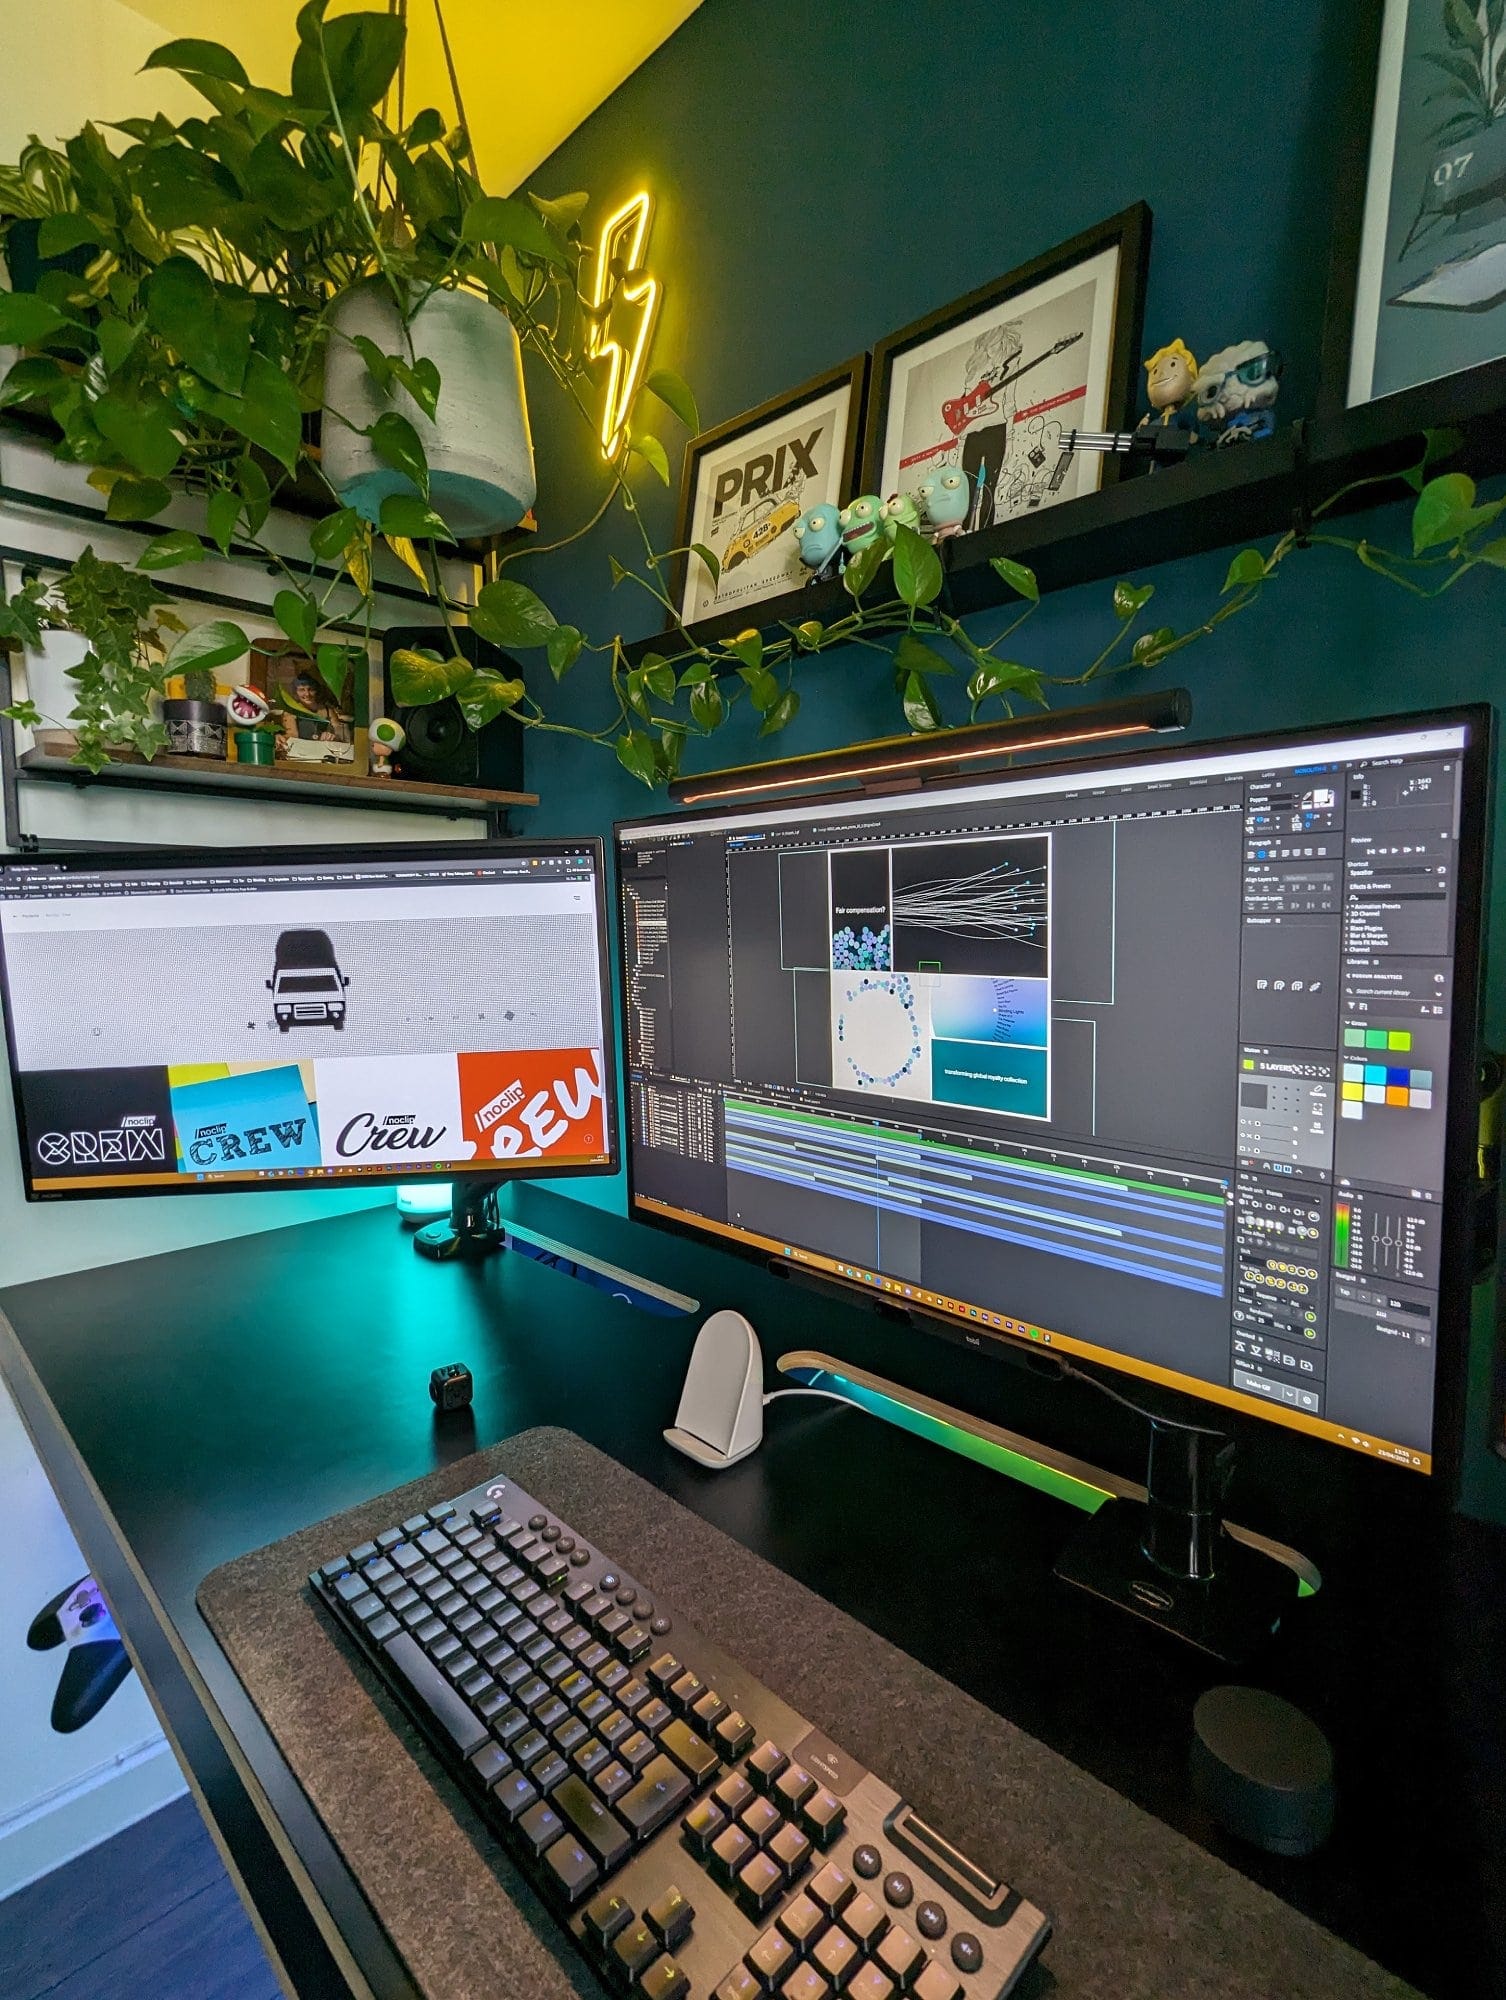 A modern home office desk setup featuring dual monitors, a mechanical keyboard, and a mouse, accented by lush green hanging plants, framed artwork, a neon lightning bolt light, and organised shelves with various decor items